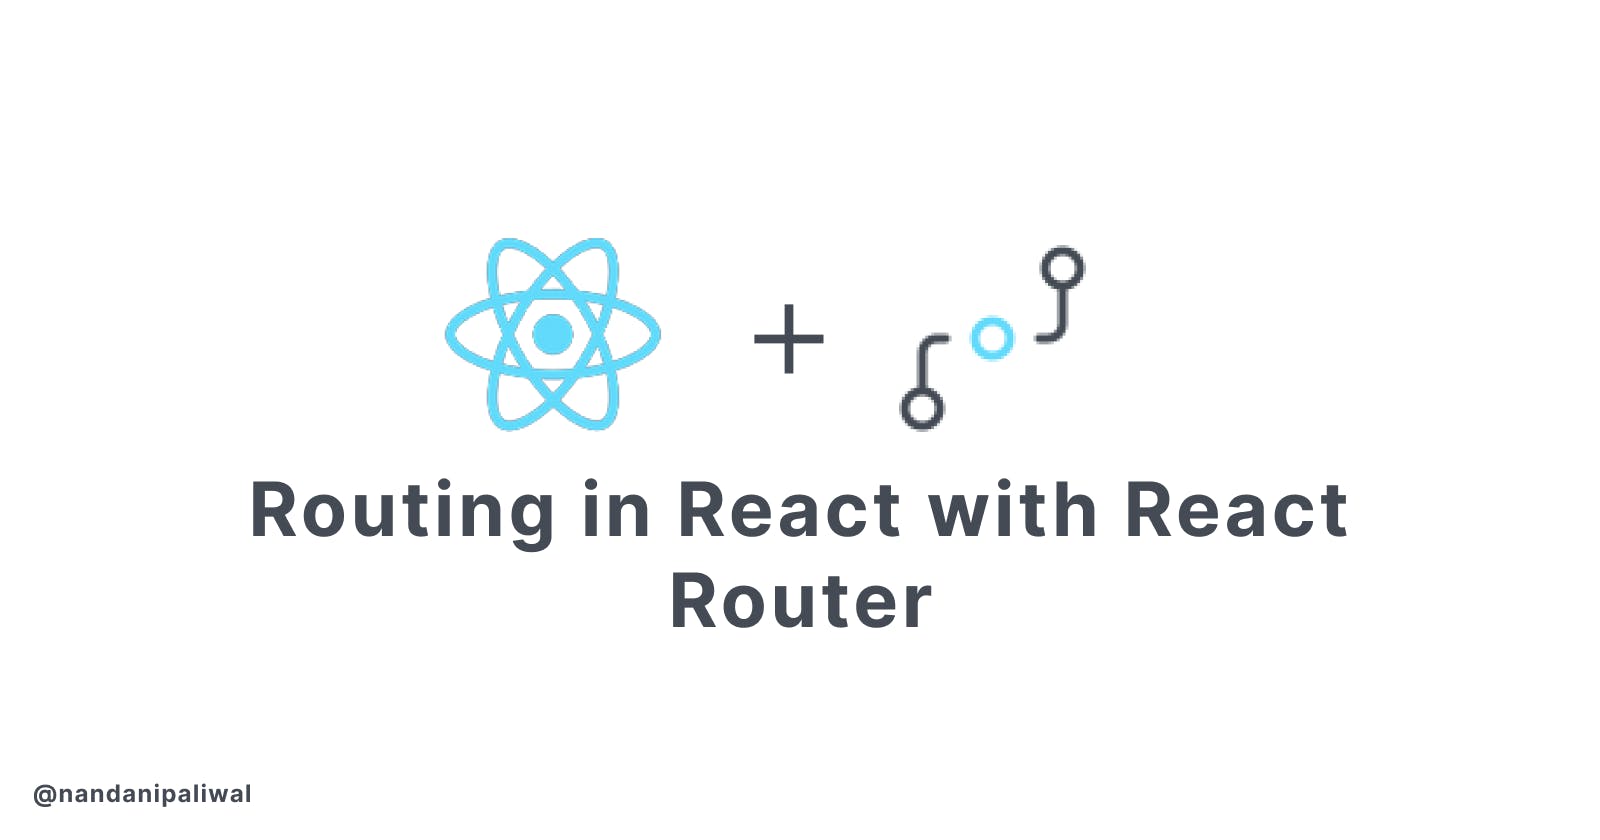 Routing in React with React Router